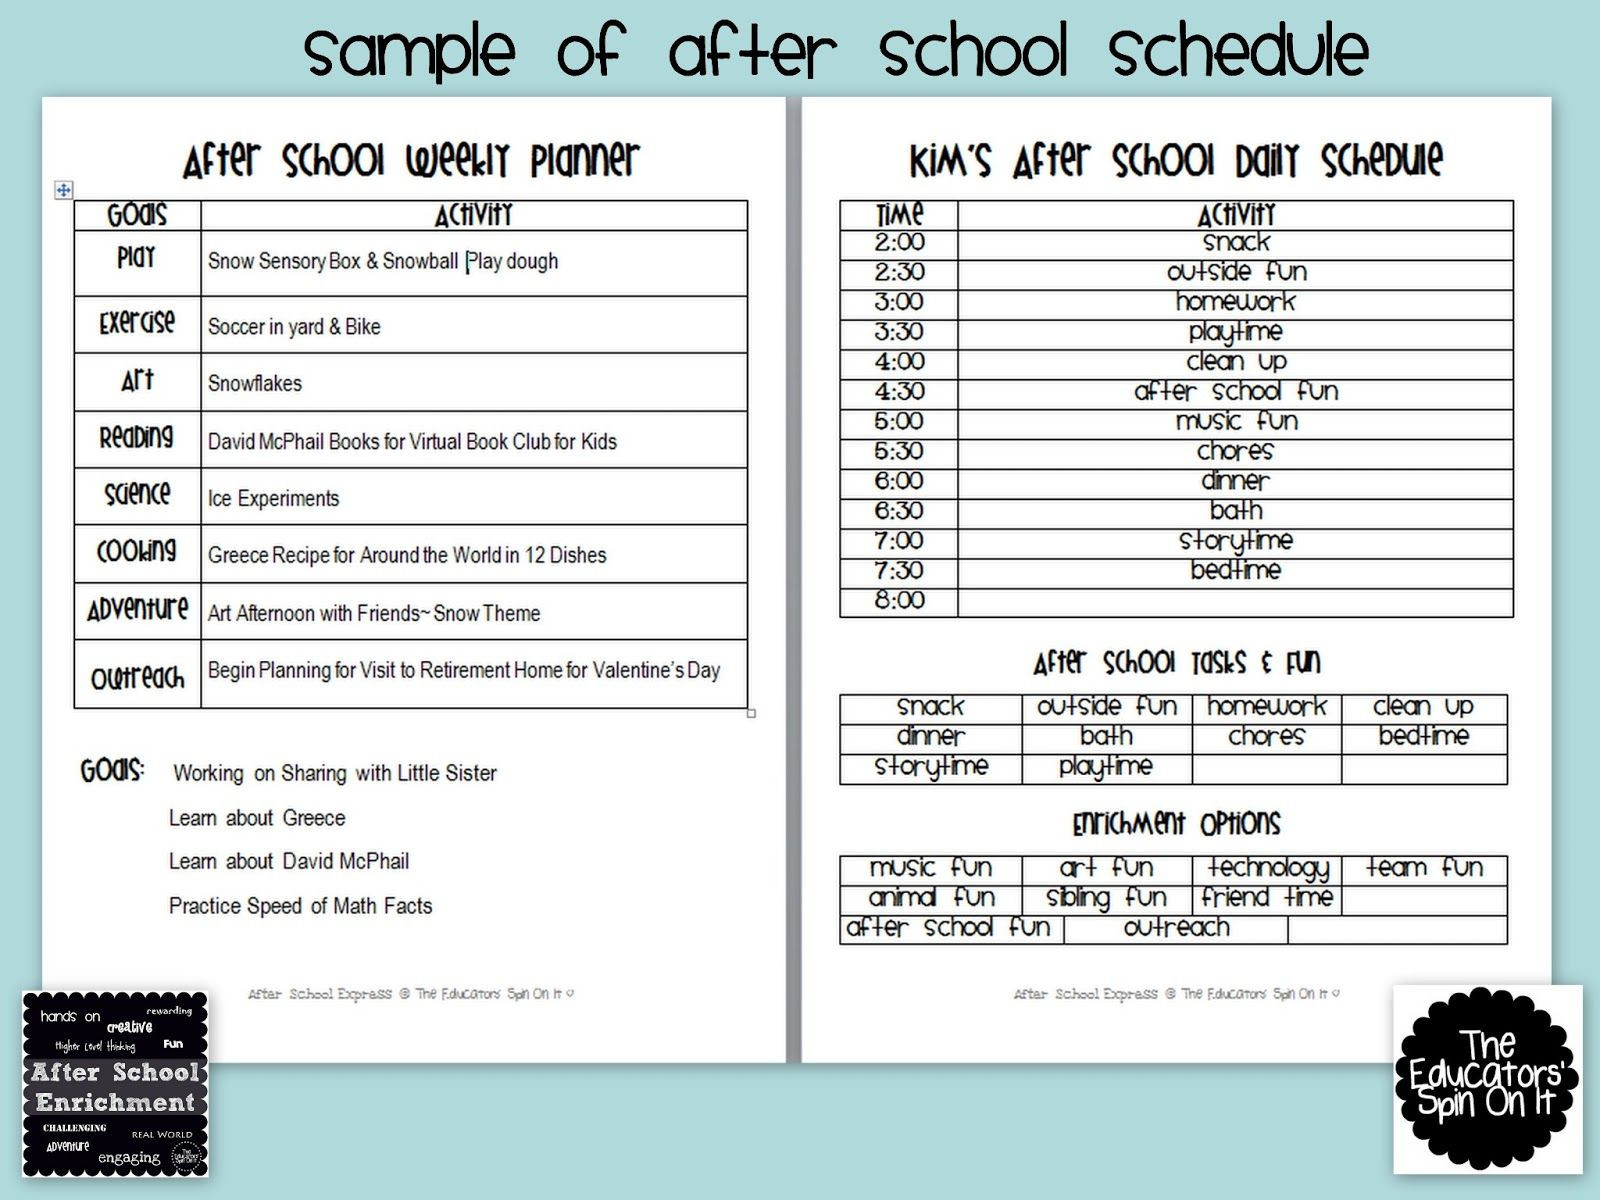 After School Lesson Plans after School Weekly Planner